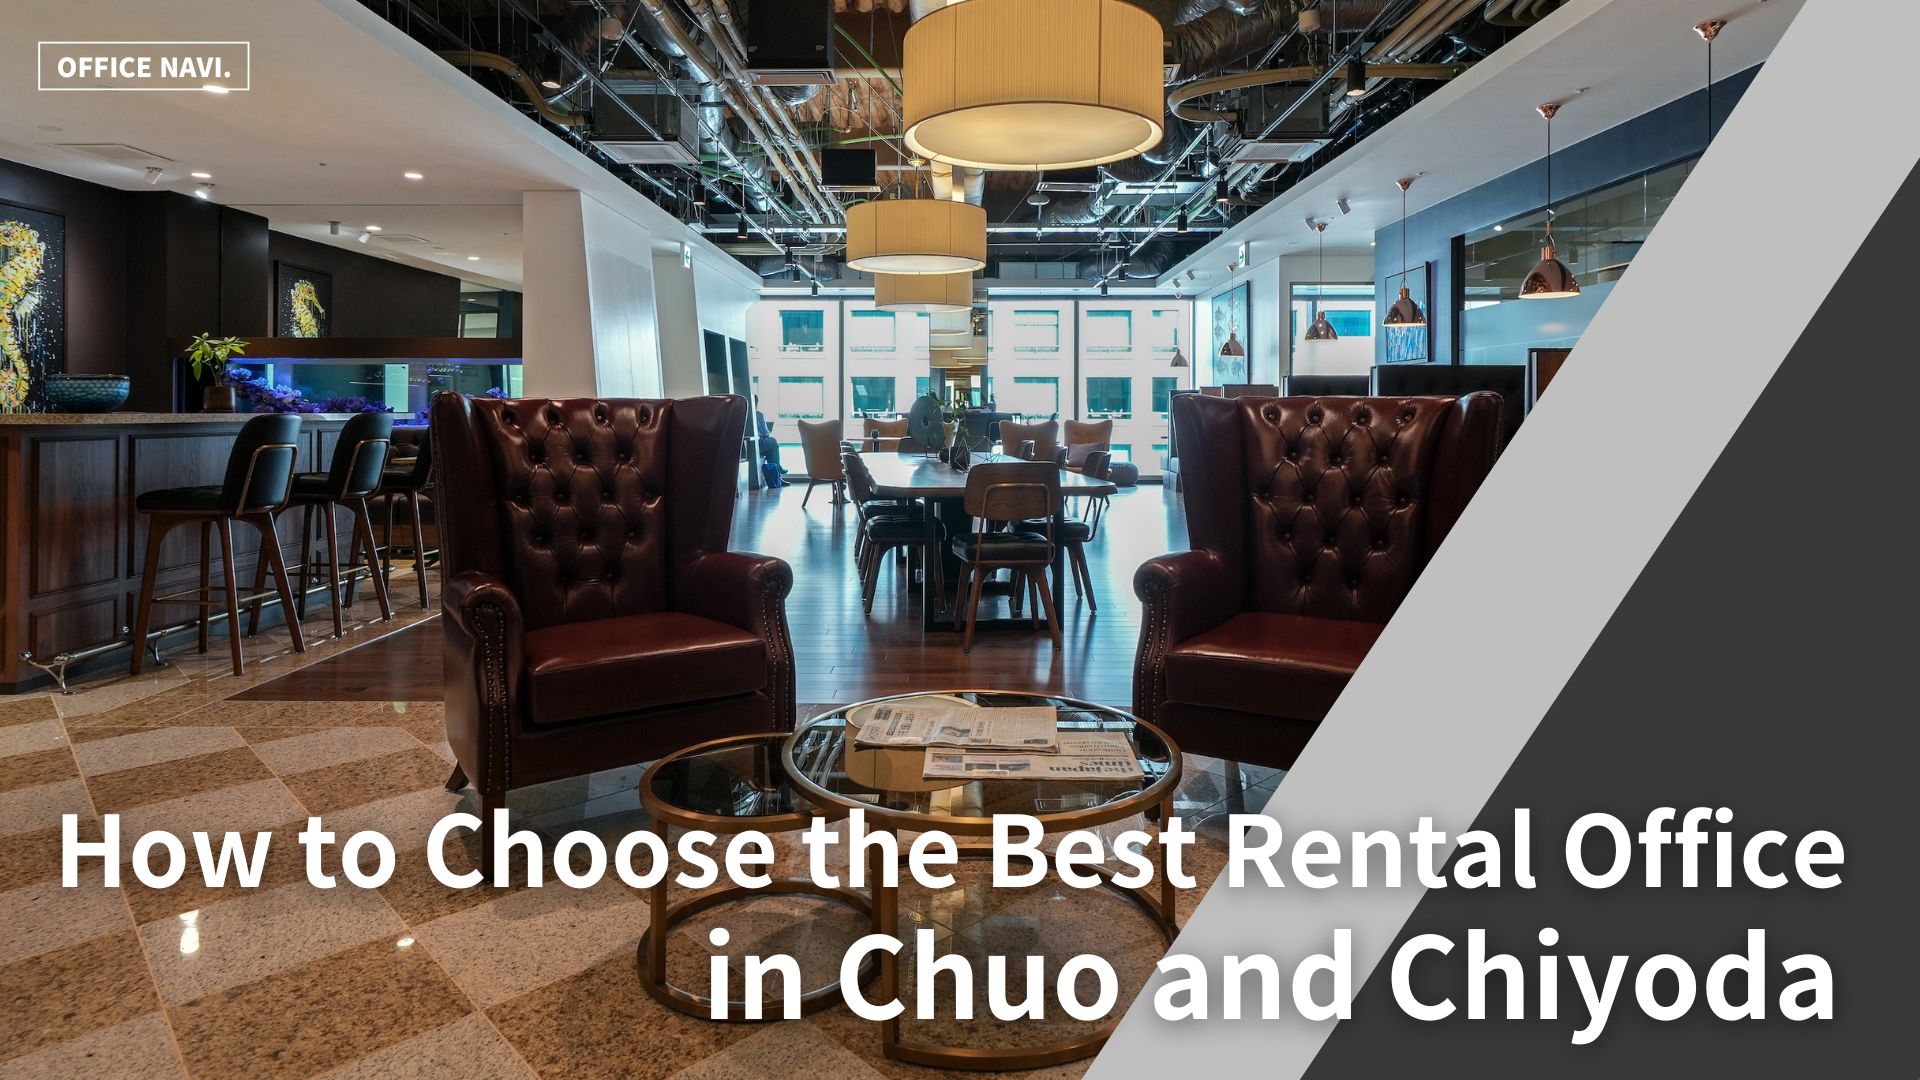 [TOKYO] How to Choose the Best Rental Office in Chuo and Chiyoda